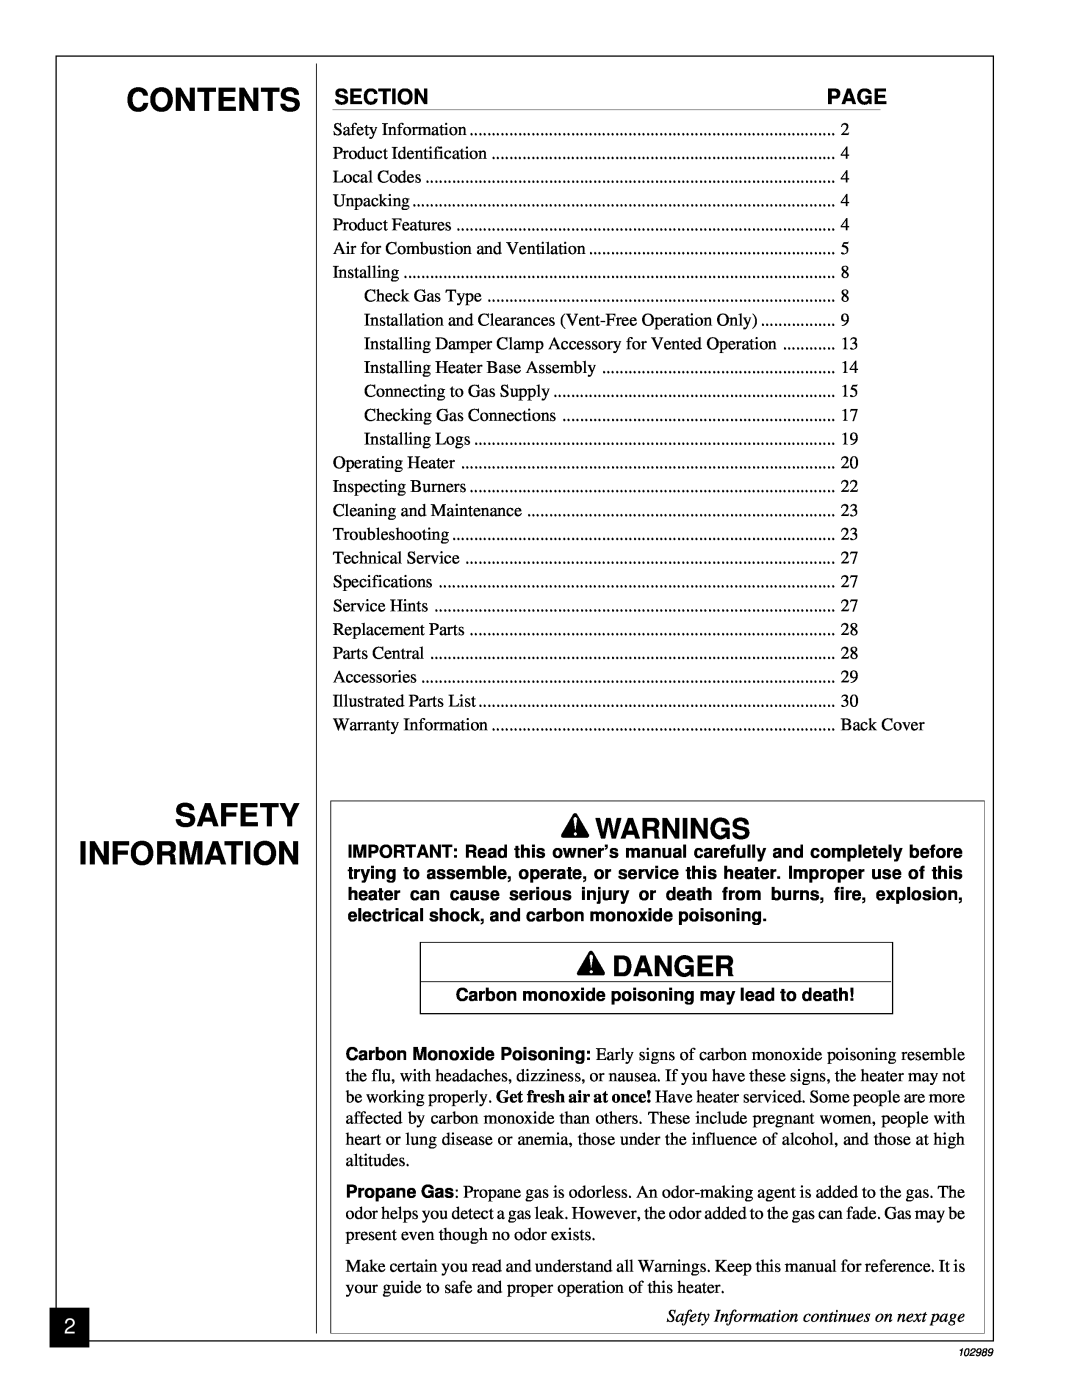 Desa CGS2718P Contents Safety Information, Warnings, Danger, Carbon monoxide poisoning may lead to death 